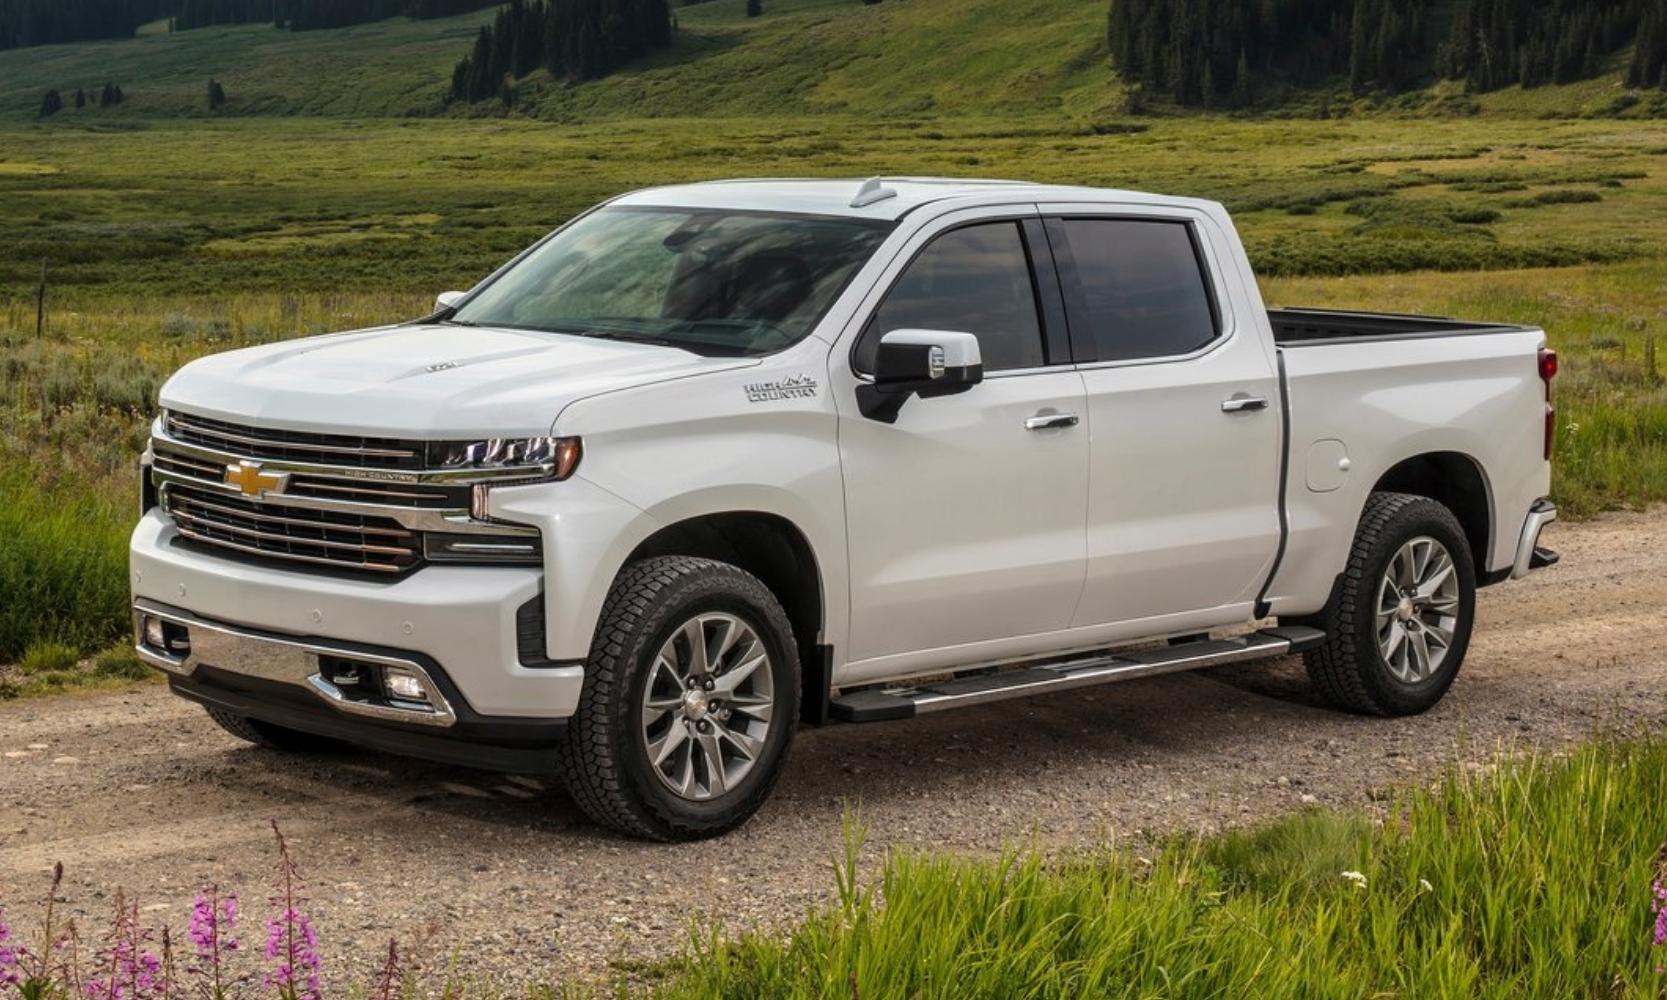 Used 2019 Chevy Silverado 1500 High Country in white exterior color